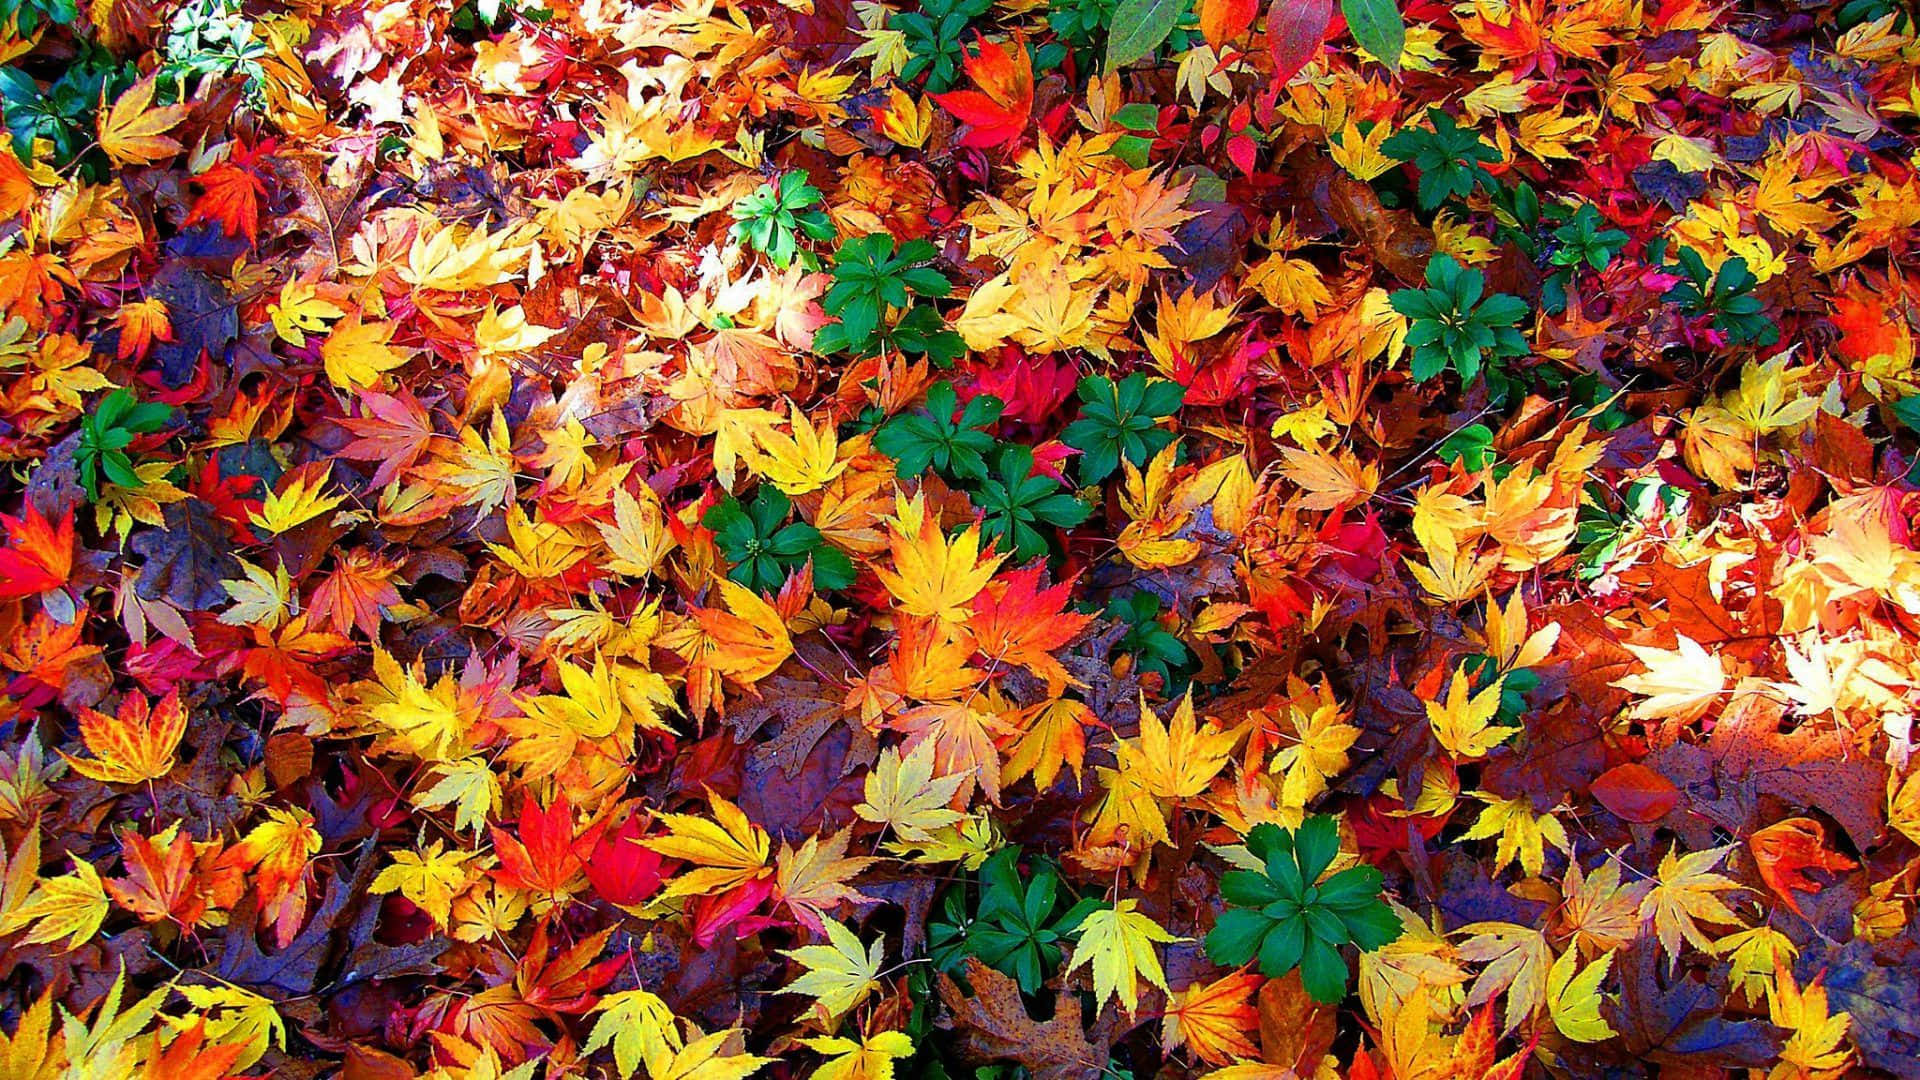 Enjoy the beauty of fall foliage in nature Wallpaper